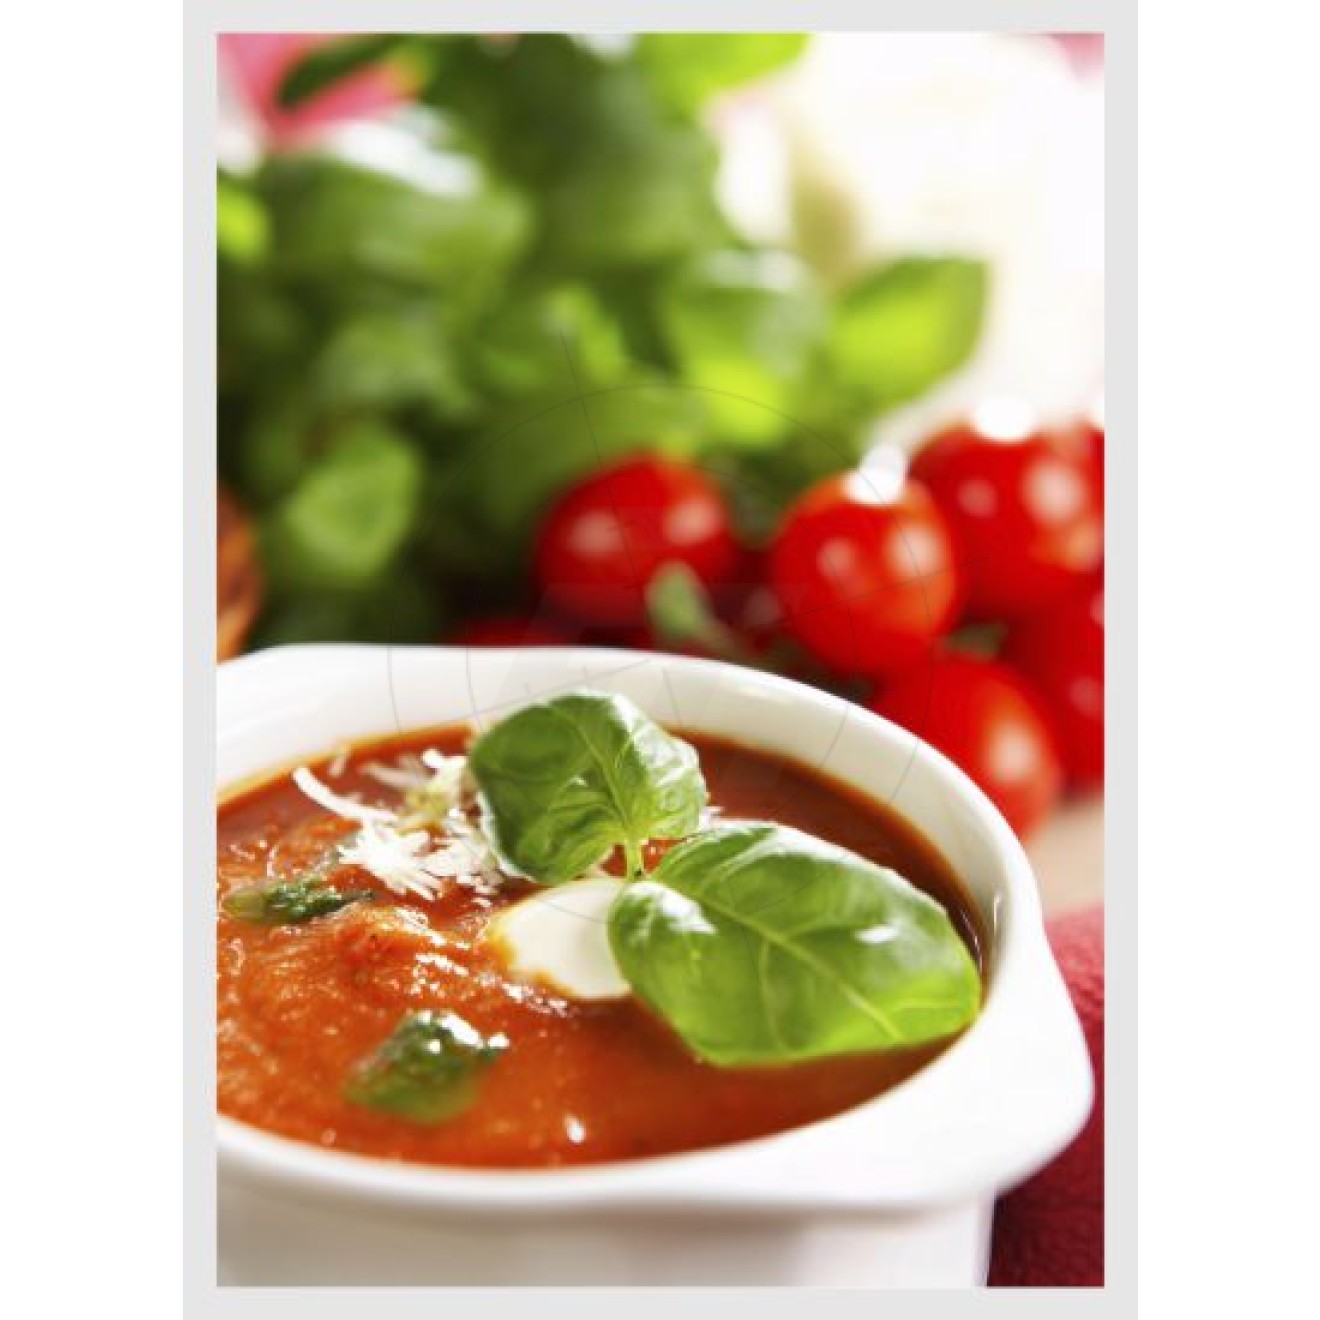 Tomato soup with basil leaf